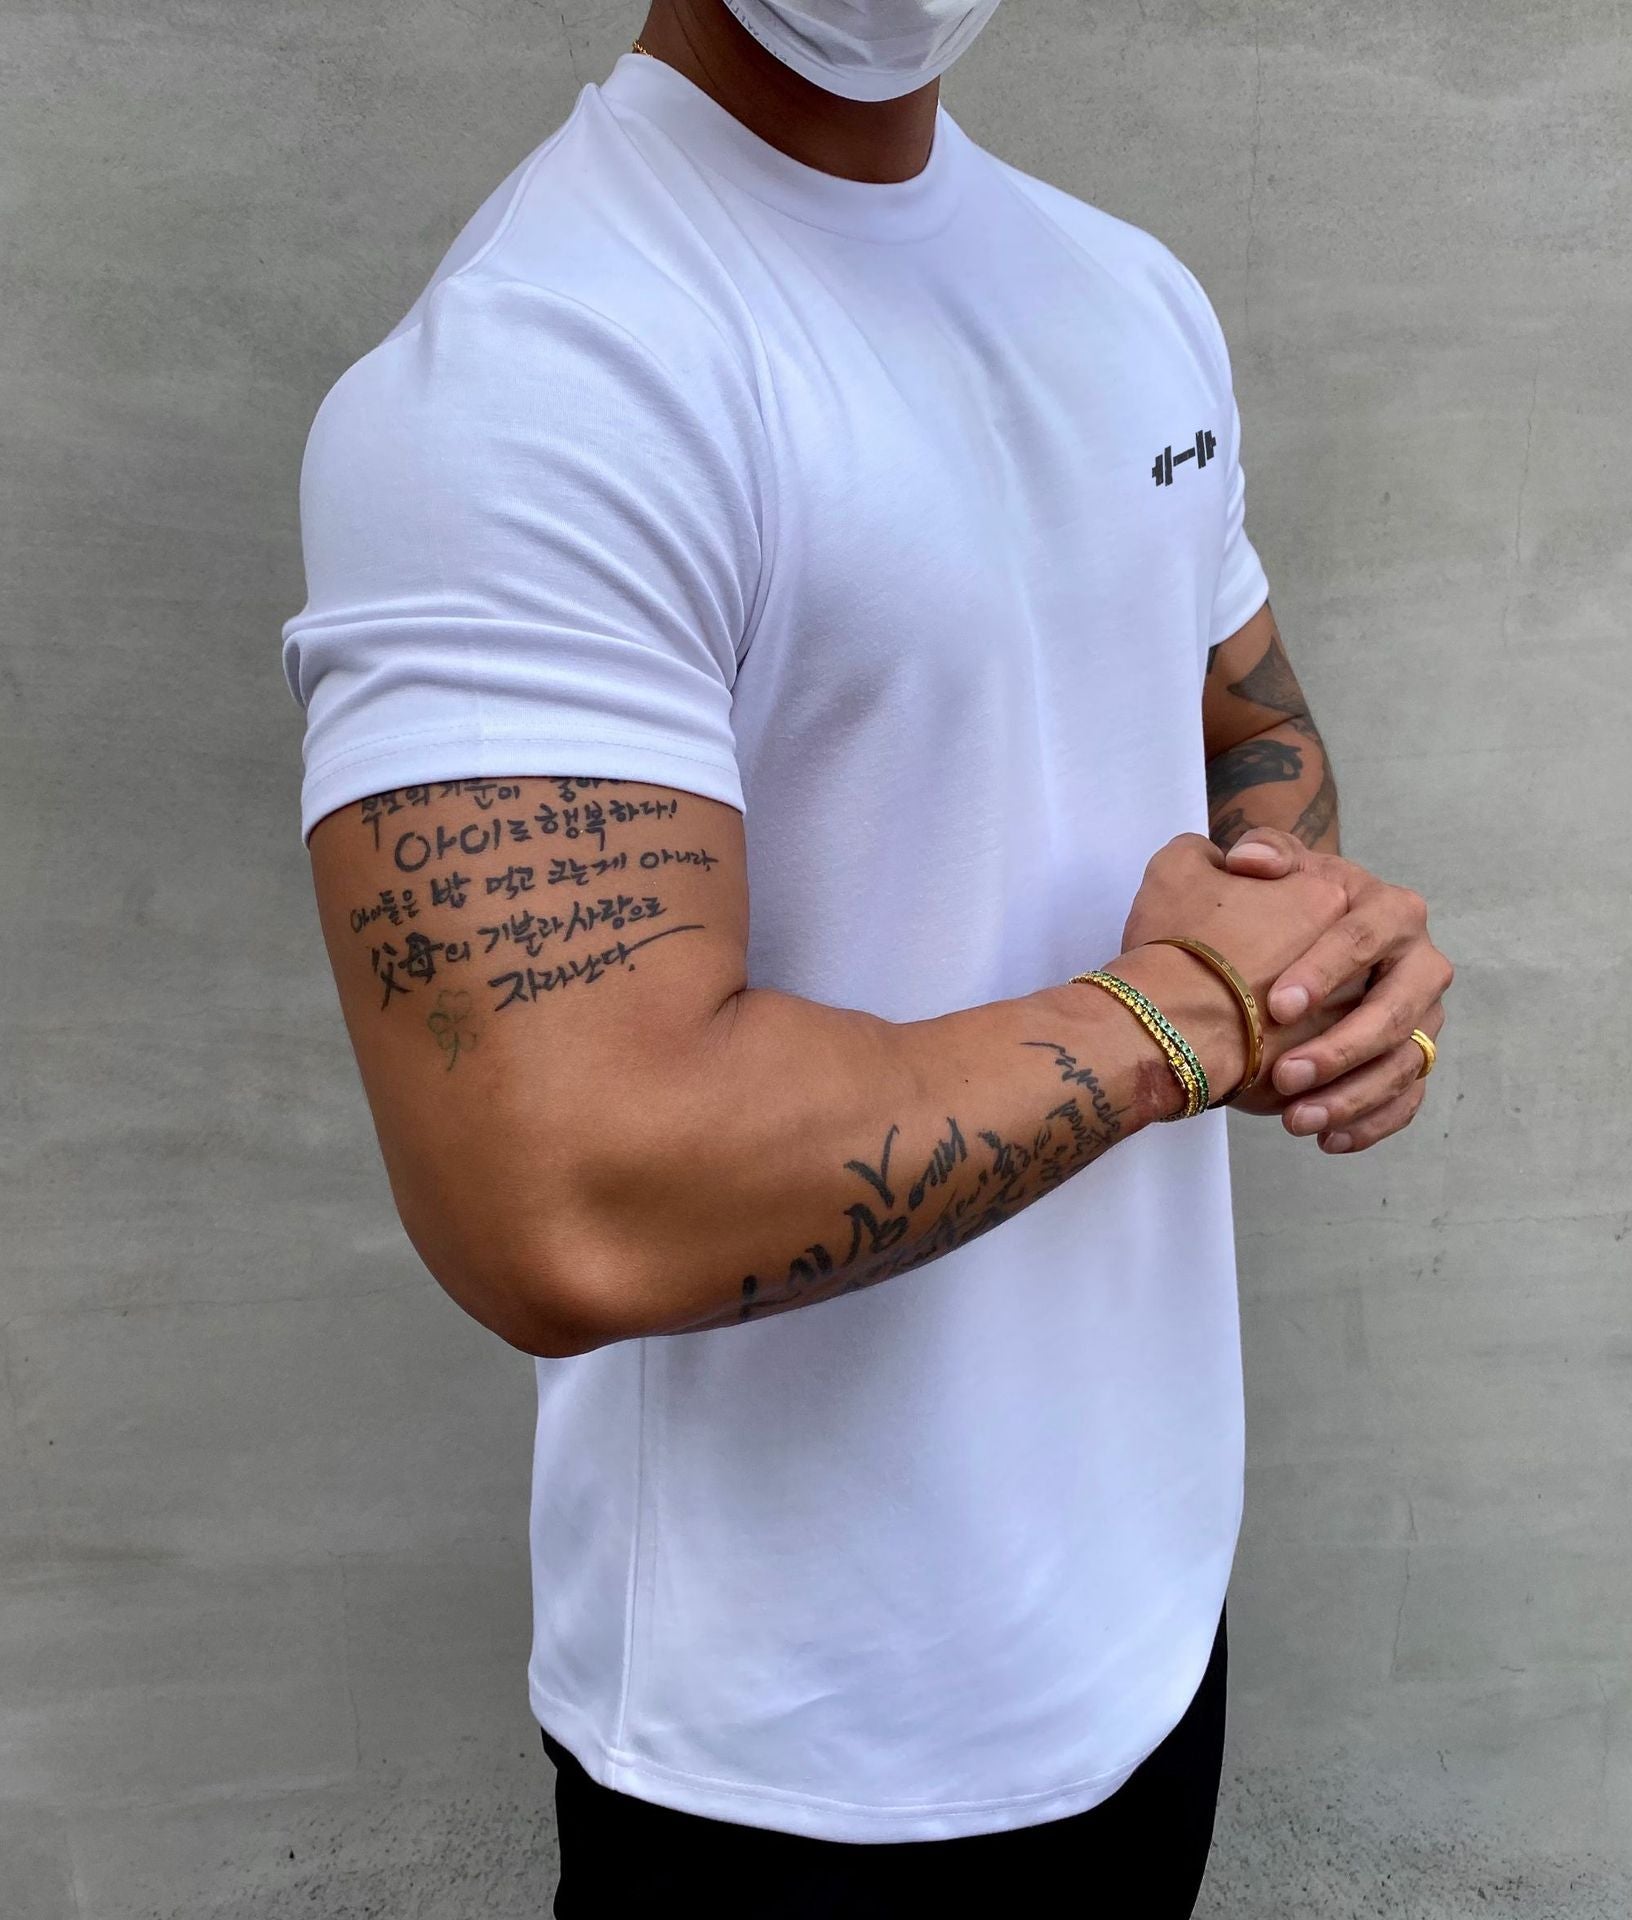 PURE COTTON STRETCHY SPORTS T-SHIRT